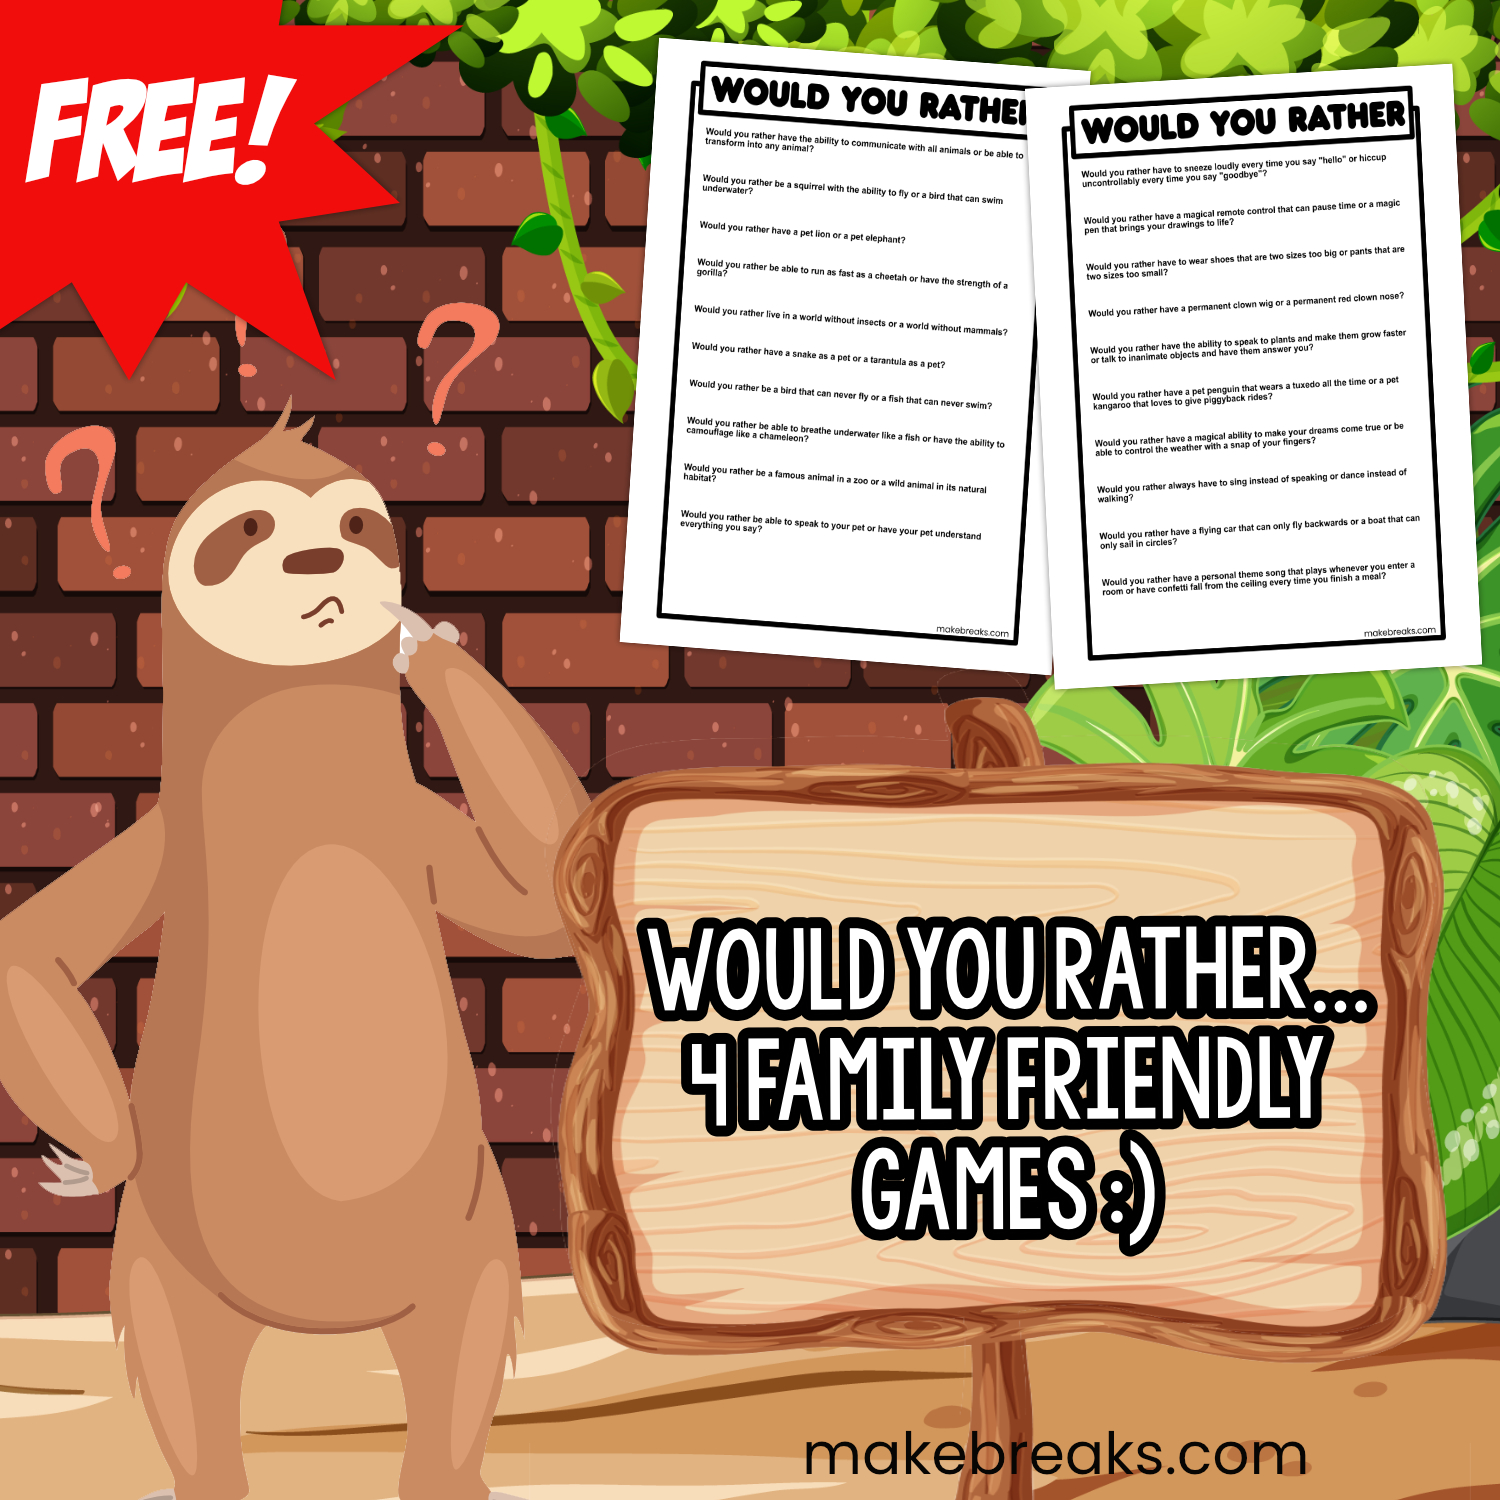 Free ‘Would You Rather’ Games for Road Trips and Parties